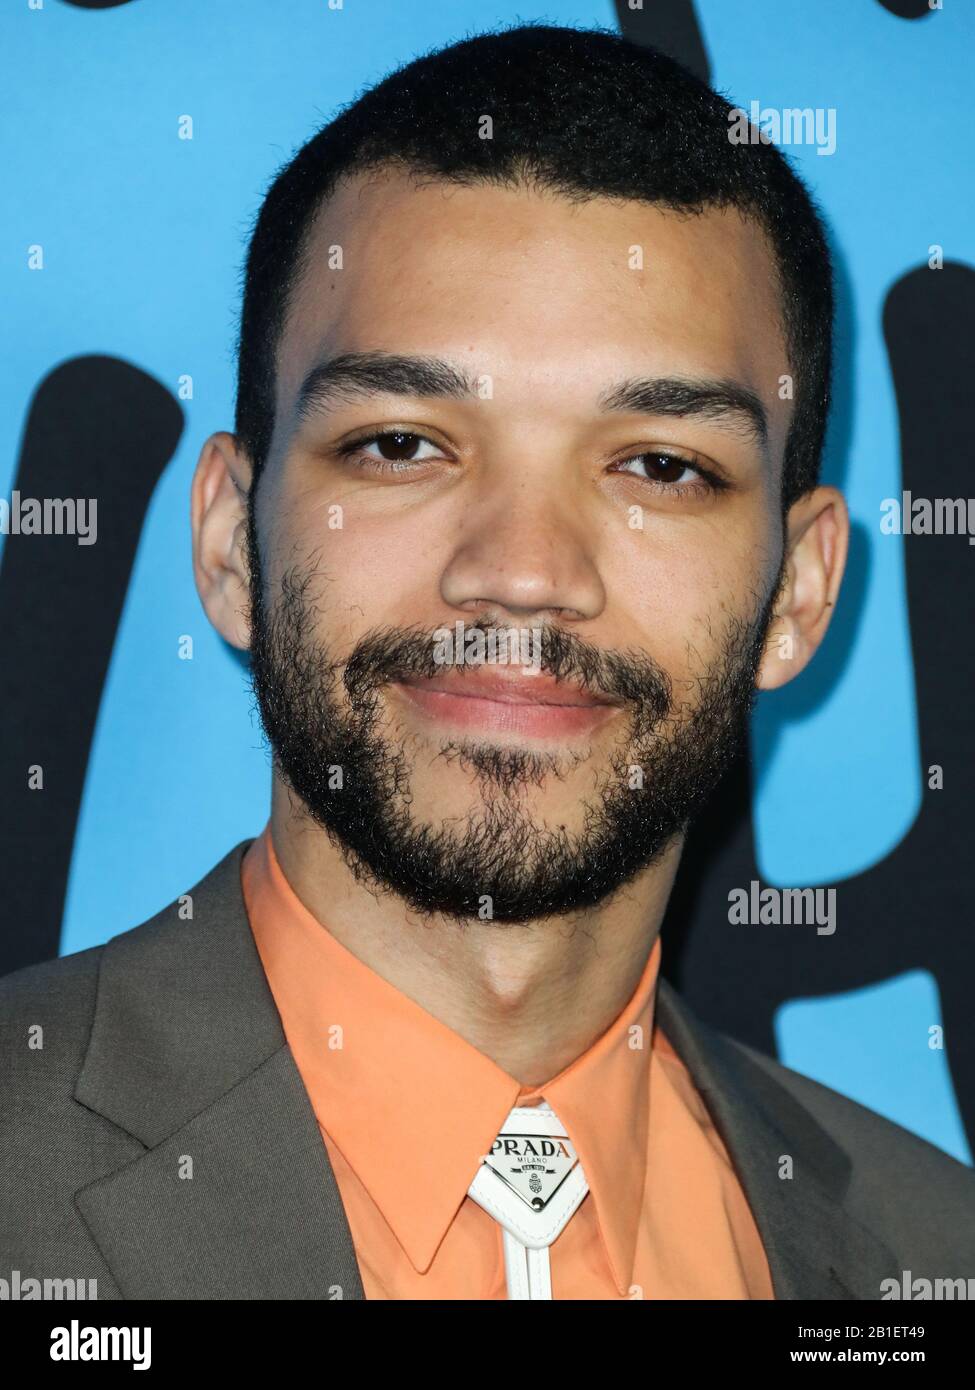 HOLLYWOOD, LOS ANGELES, CALIFORNIA, USA - FEBRUARY 24: Actor Justice Smith  wearing Prada arrives at the Los Angeles Special Screening Of Netflix's  'All The Bright Places' held at ArcLight Hollywood on February